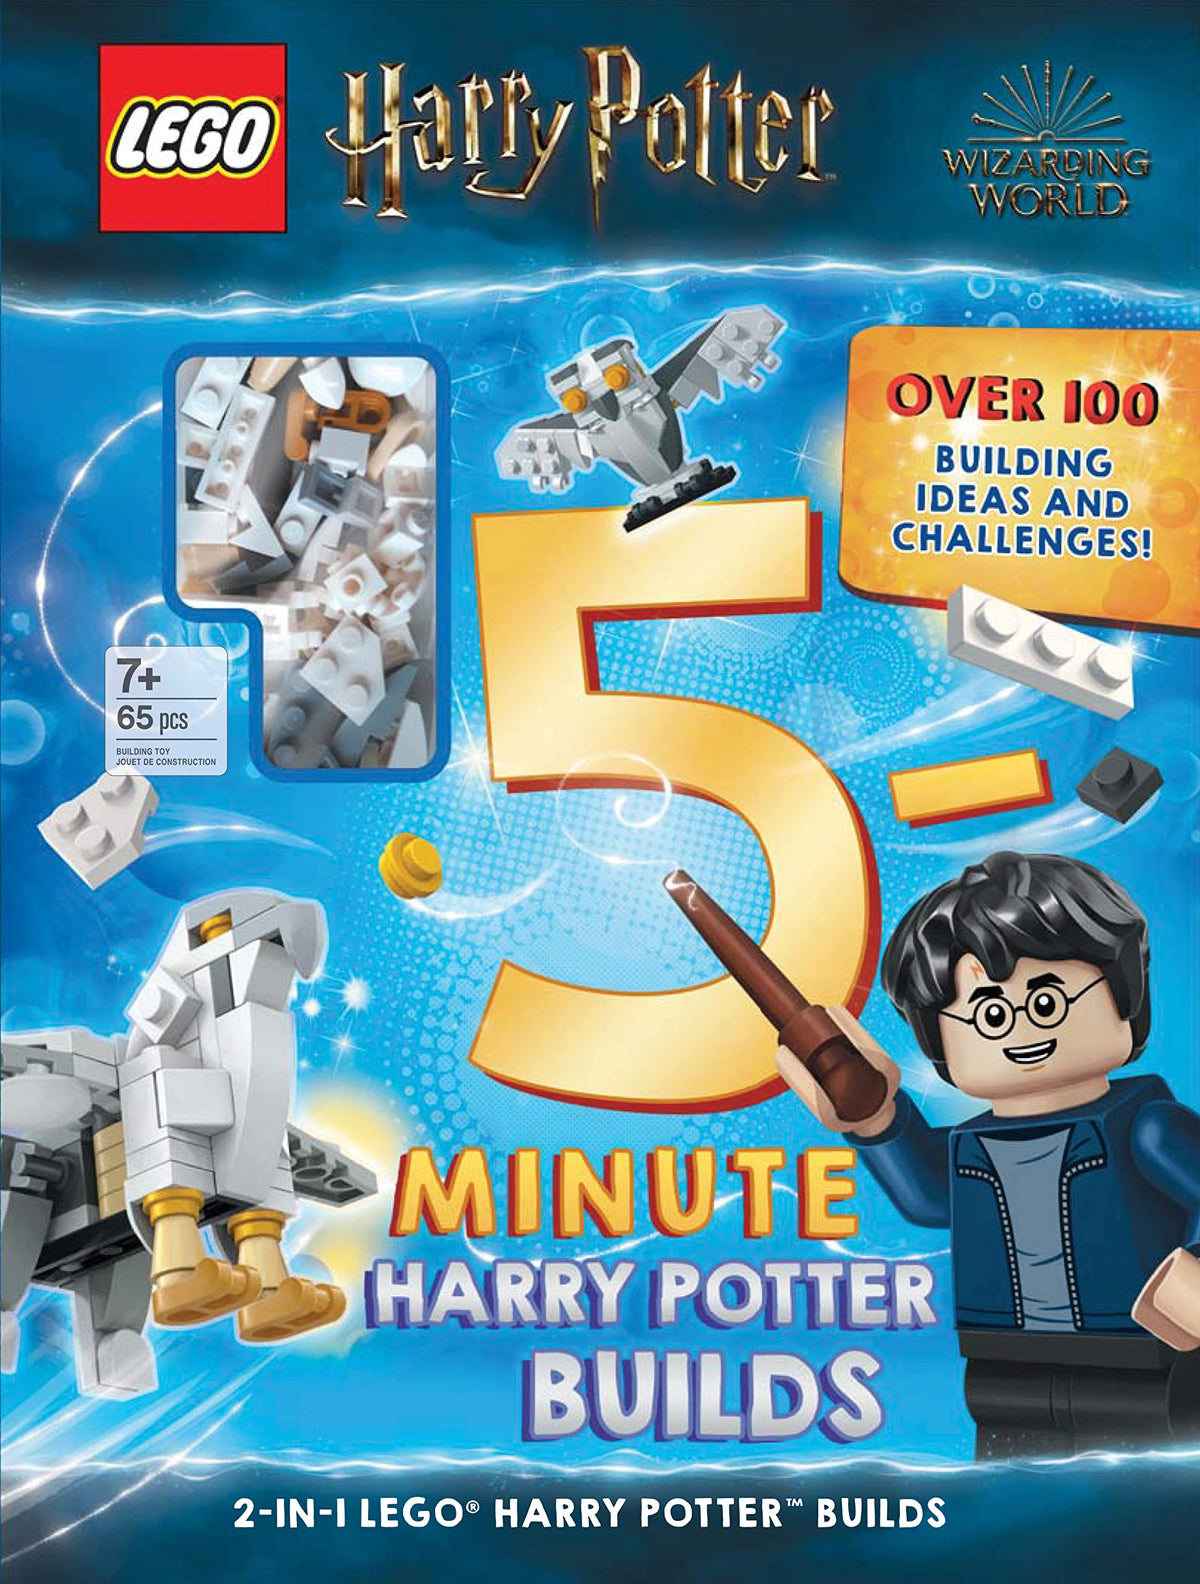 Lego: Harry Potter 5 minute builds